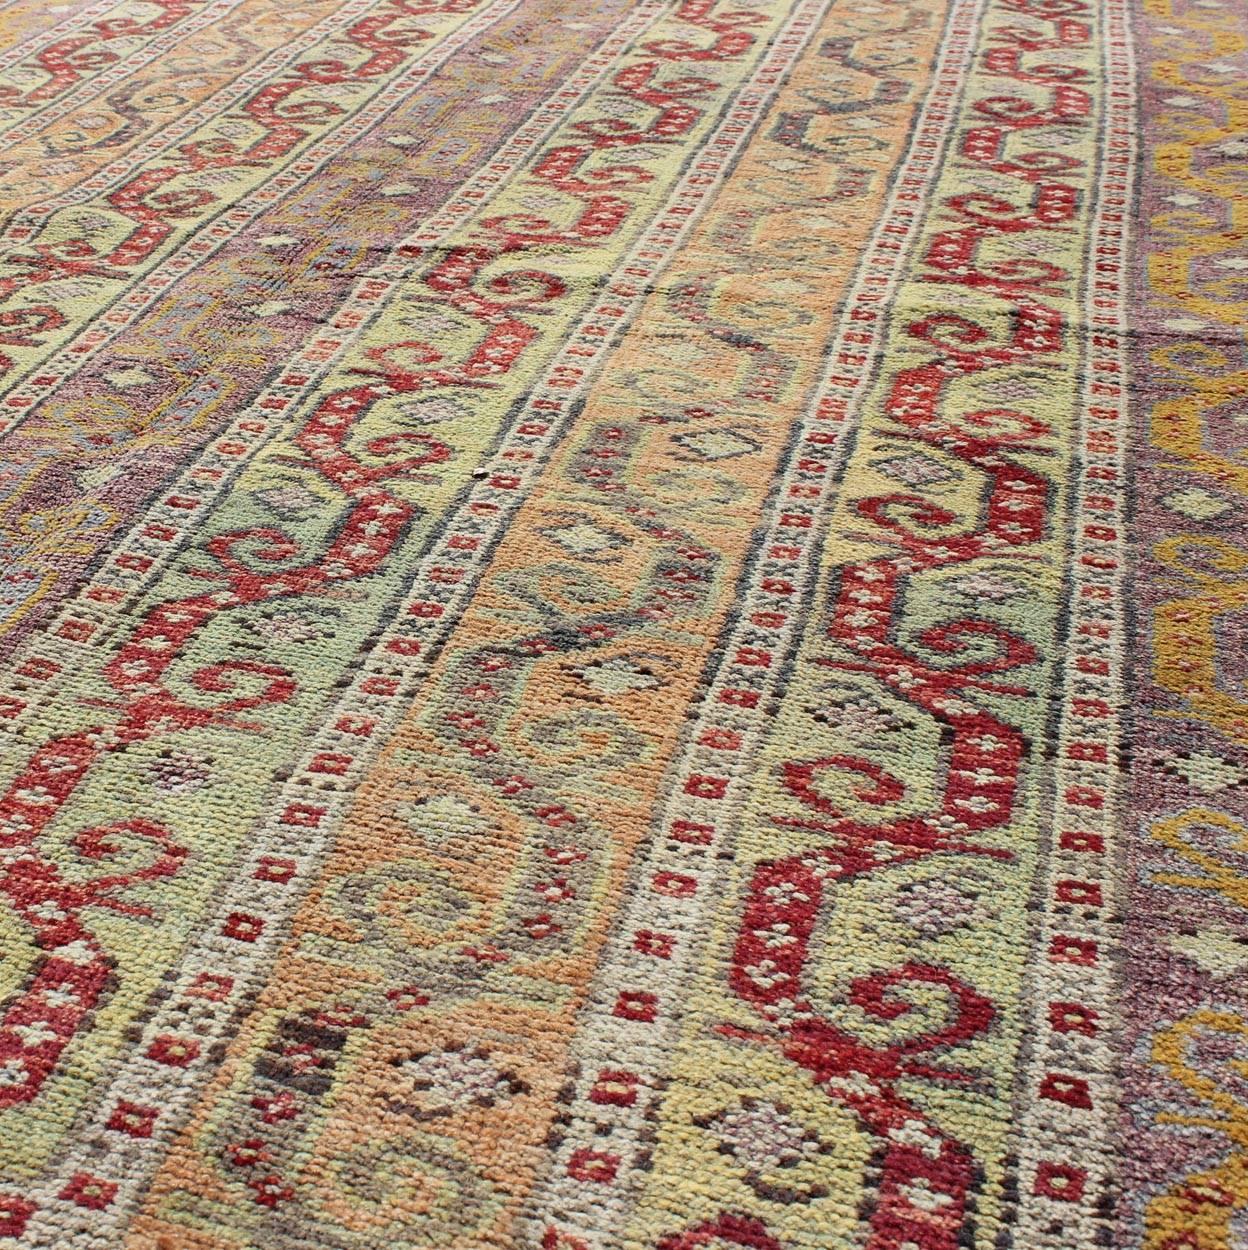 Vintage Turkish Rug with a All-Over Modern Design in Green, Red and Purple In Excellent Condition For Sale In Atlanta, GA